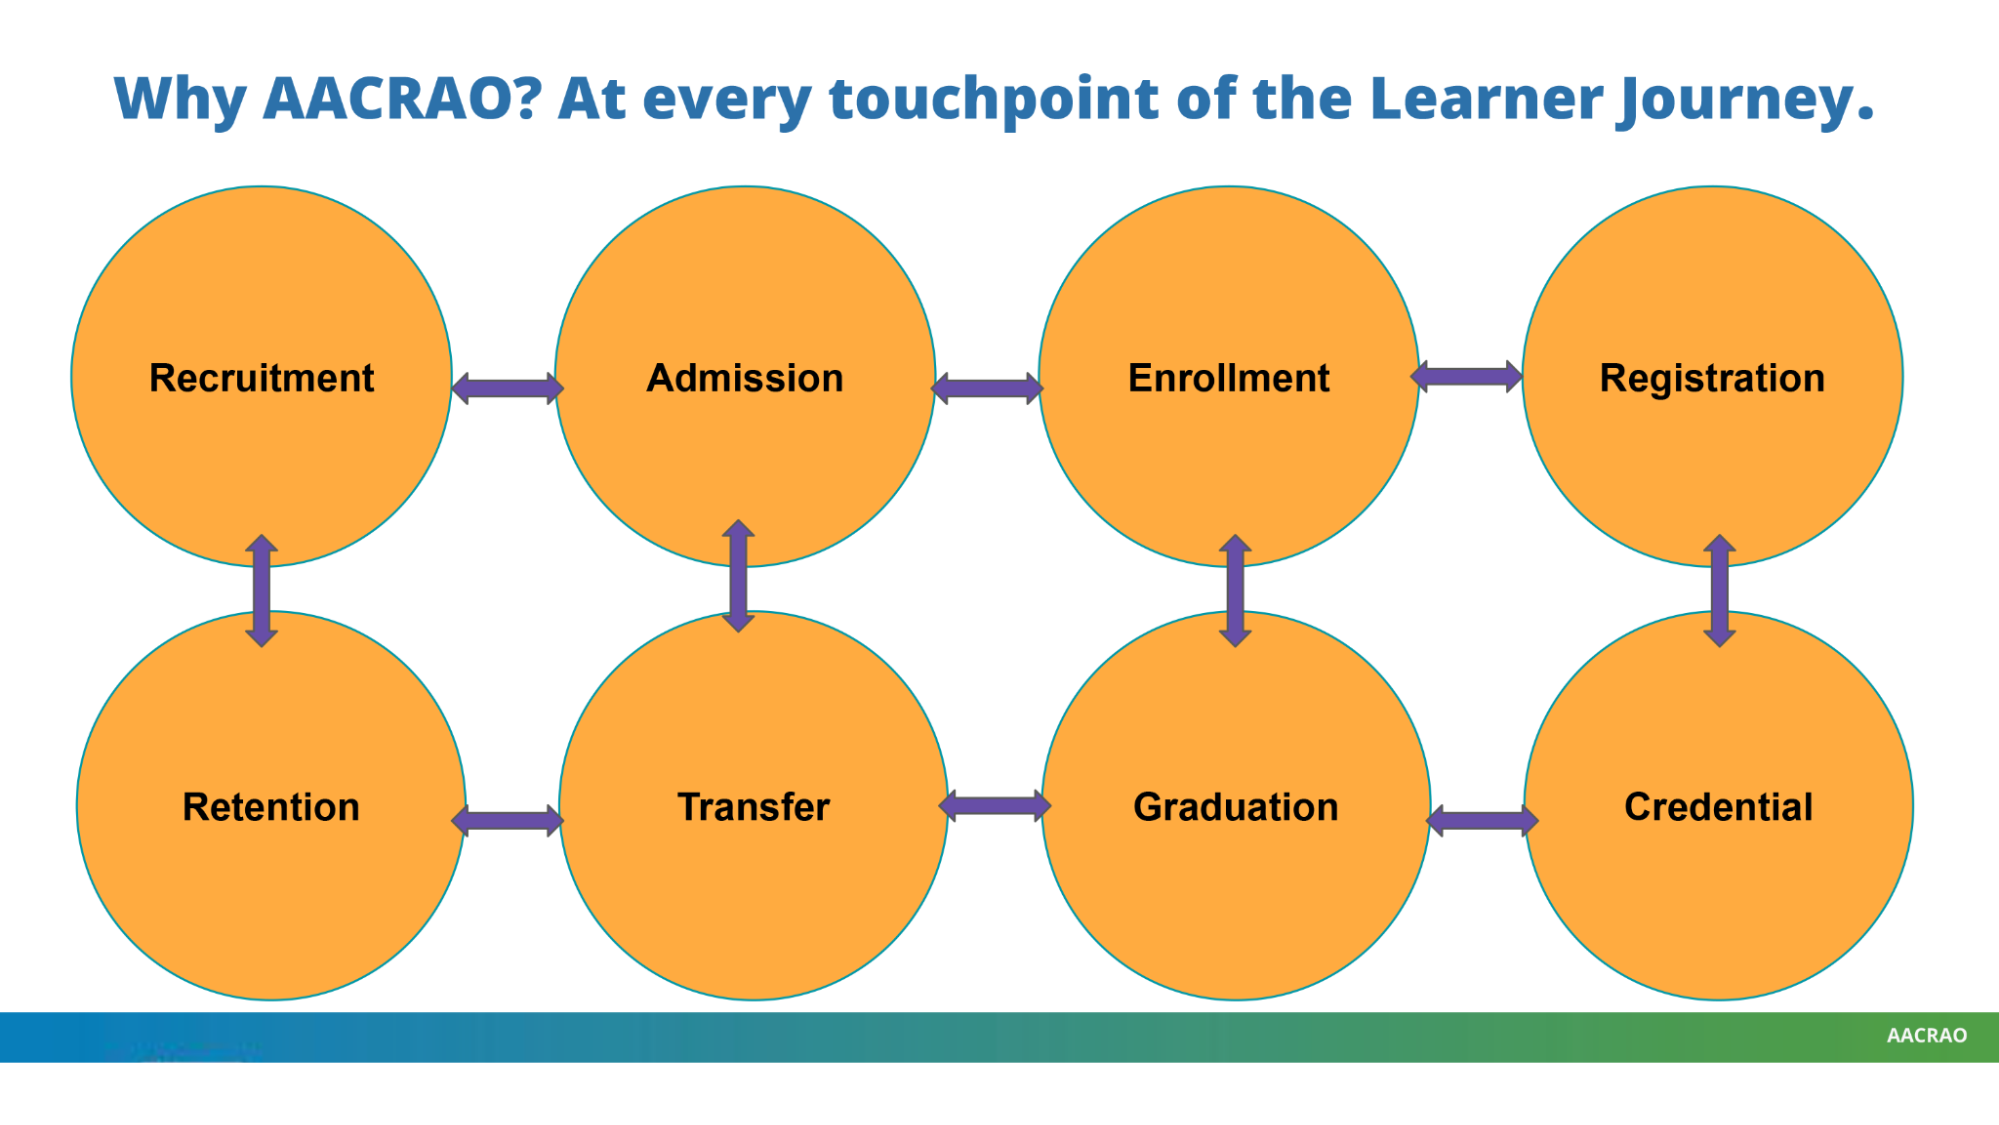 AACRAO Touchpoint illustration